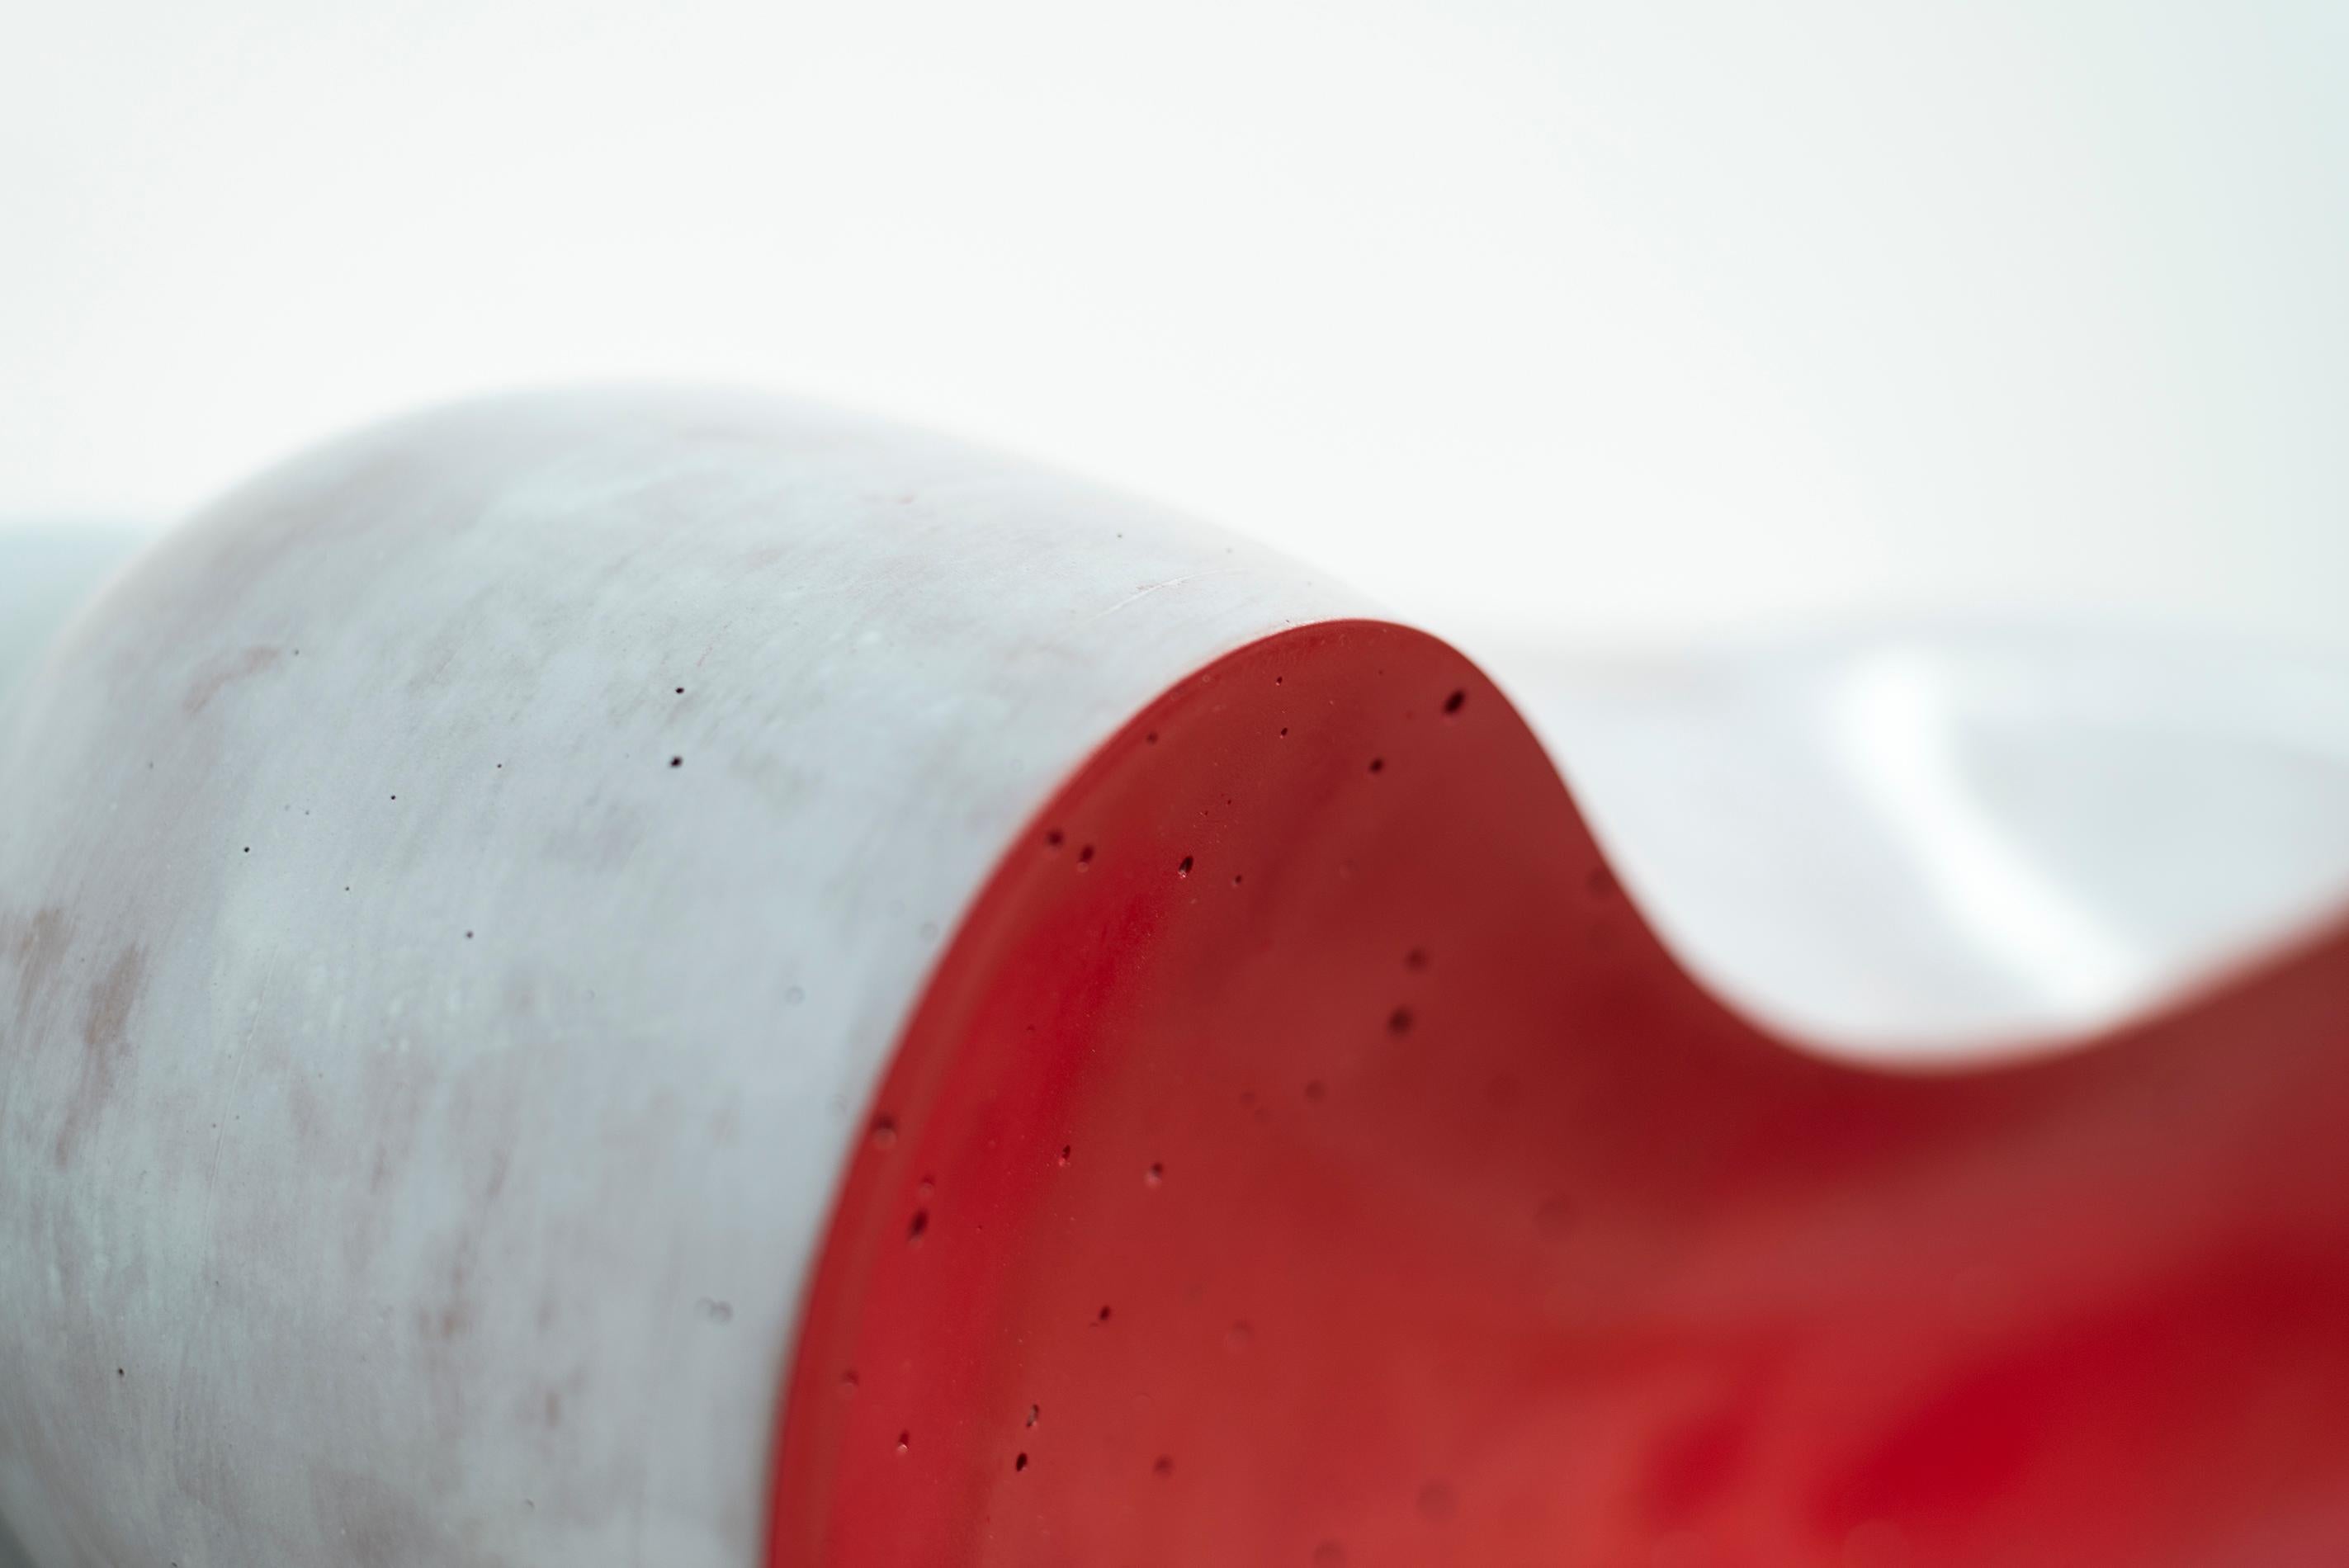 La Bouche - playful, red, white, abstract, elongated, ceramic wall sculpture For Sale 3